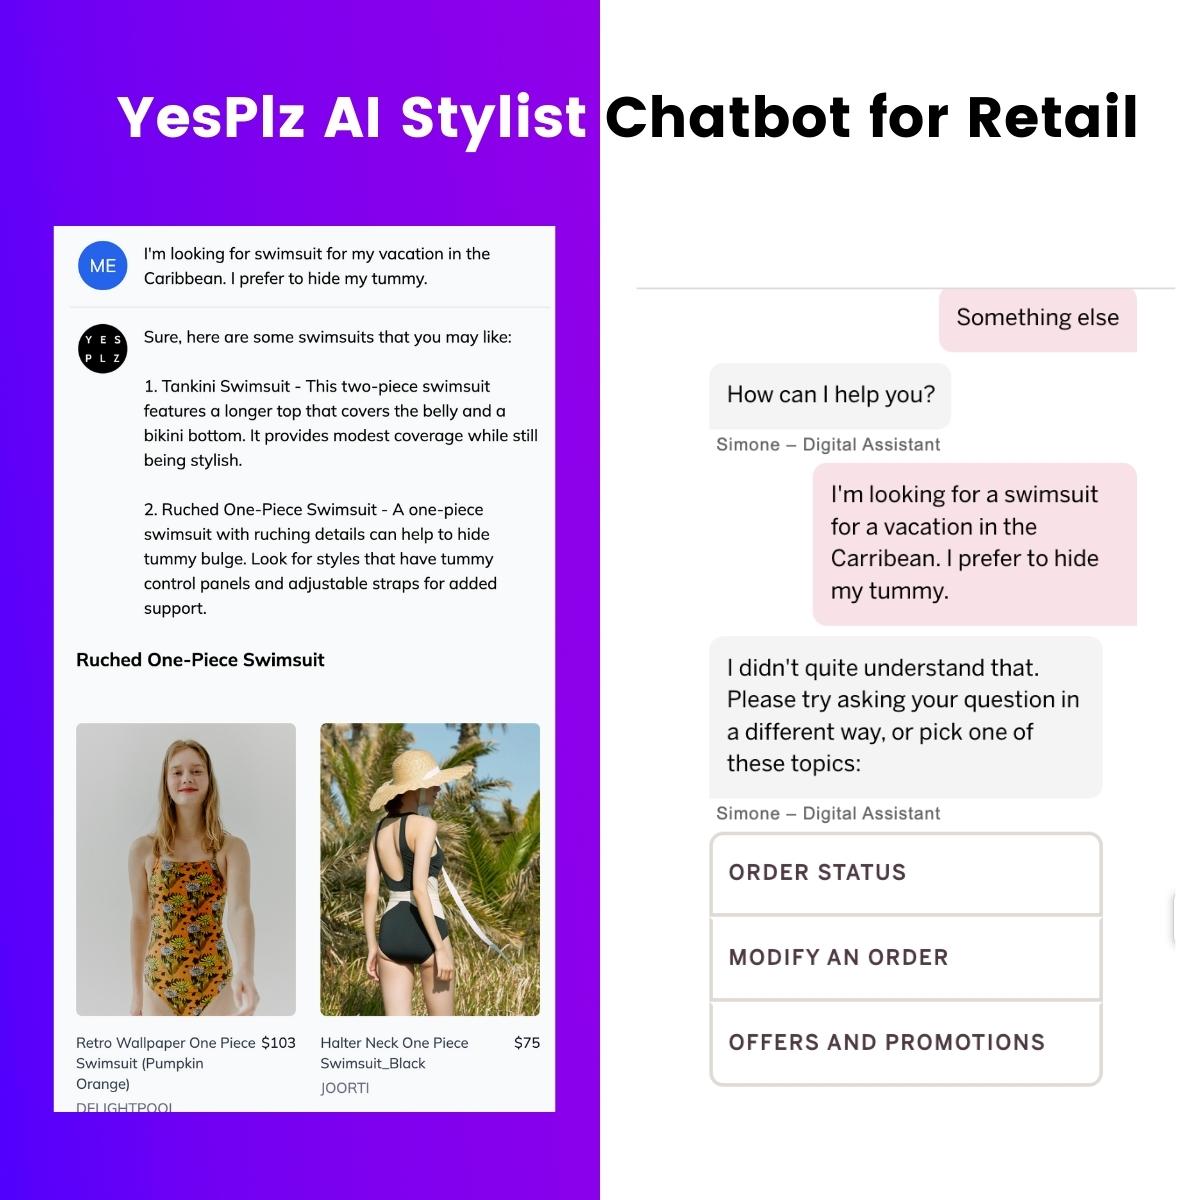 YesPlz GPT AI Stylist versus chatbot for retail side by side